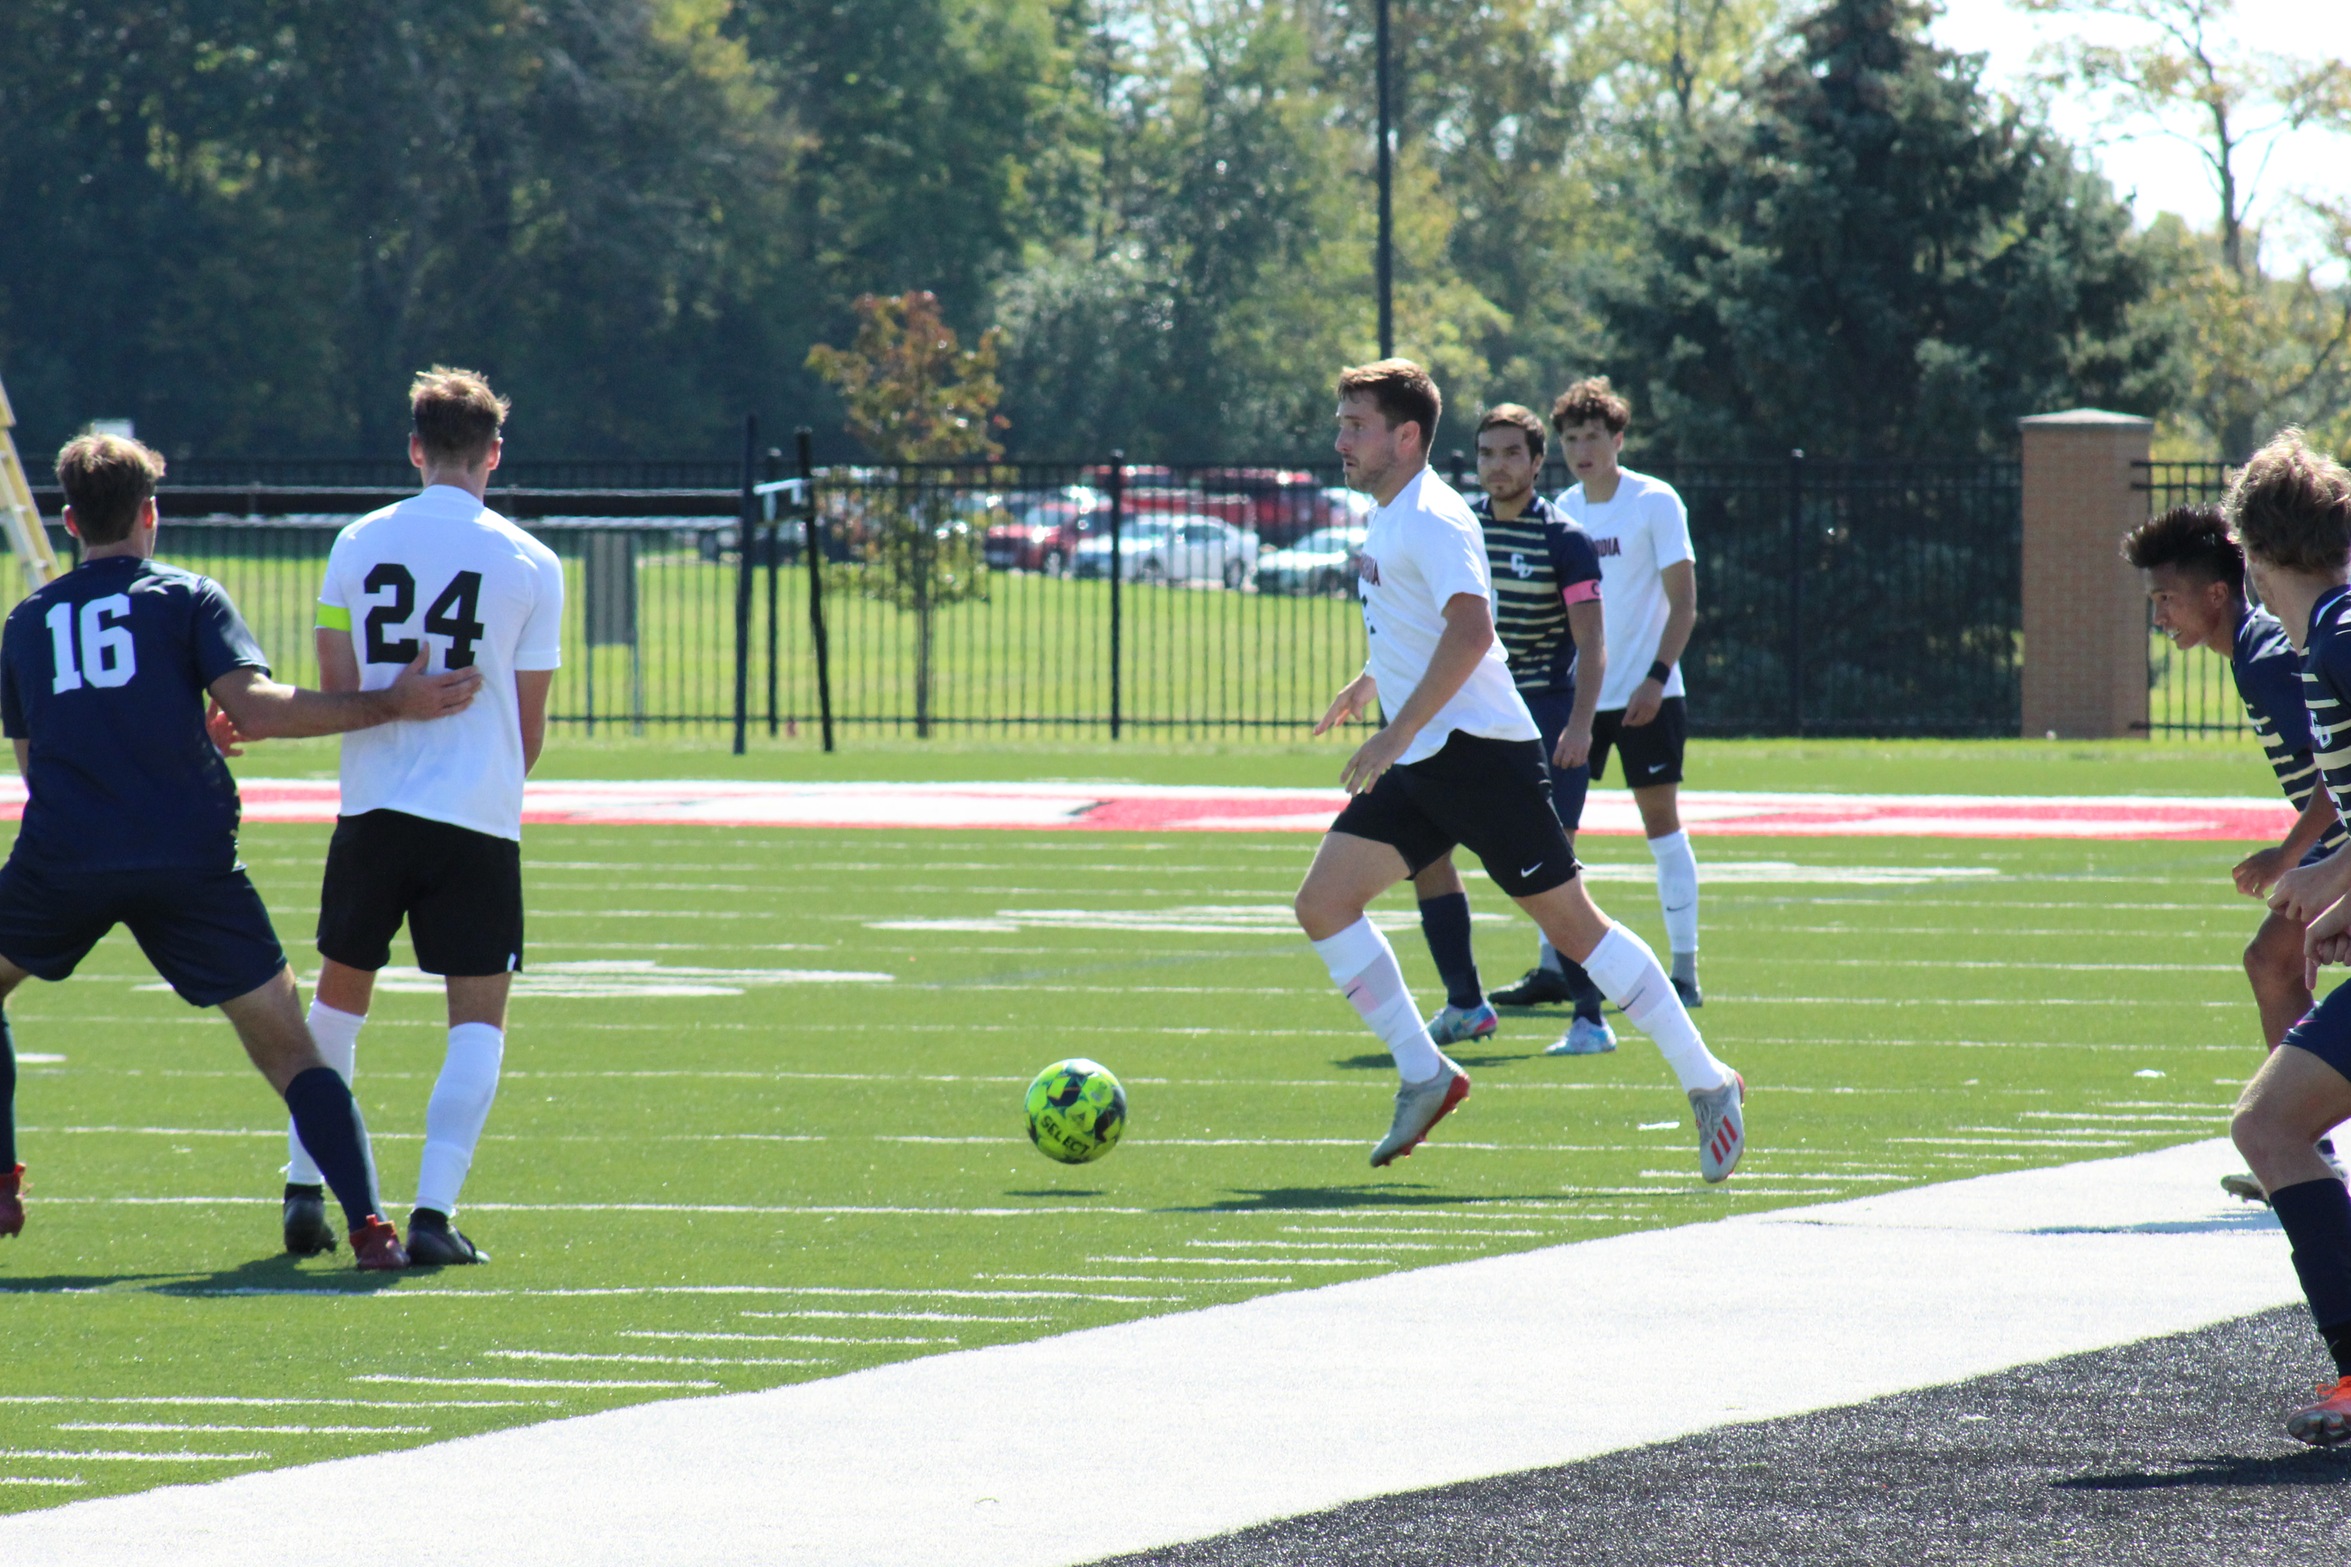 Men's Soccer takes UNOH to overtime but falls 2-3